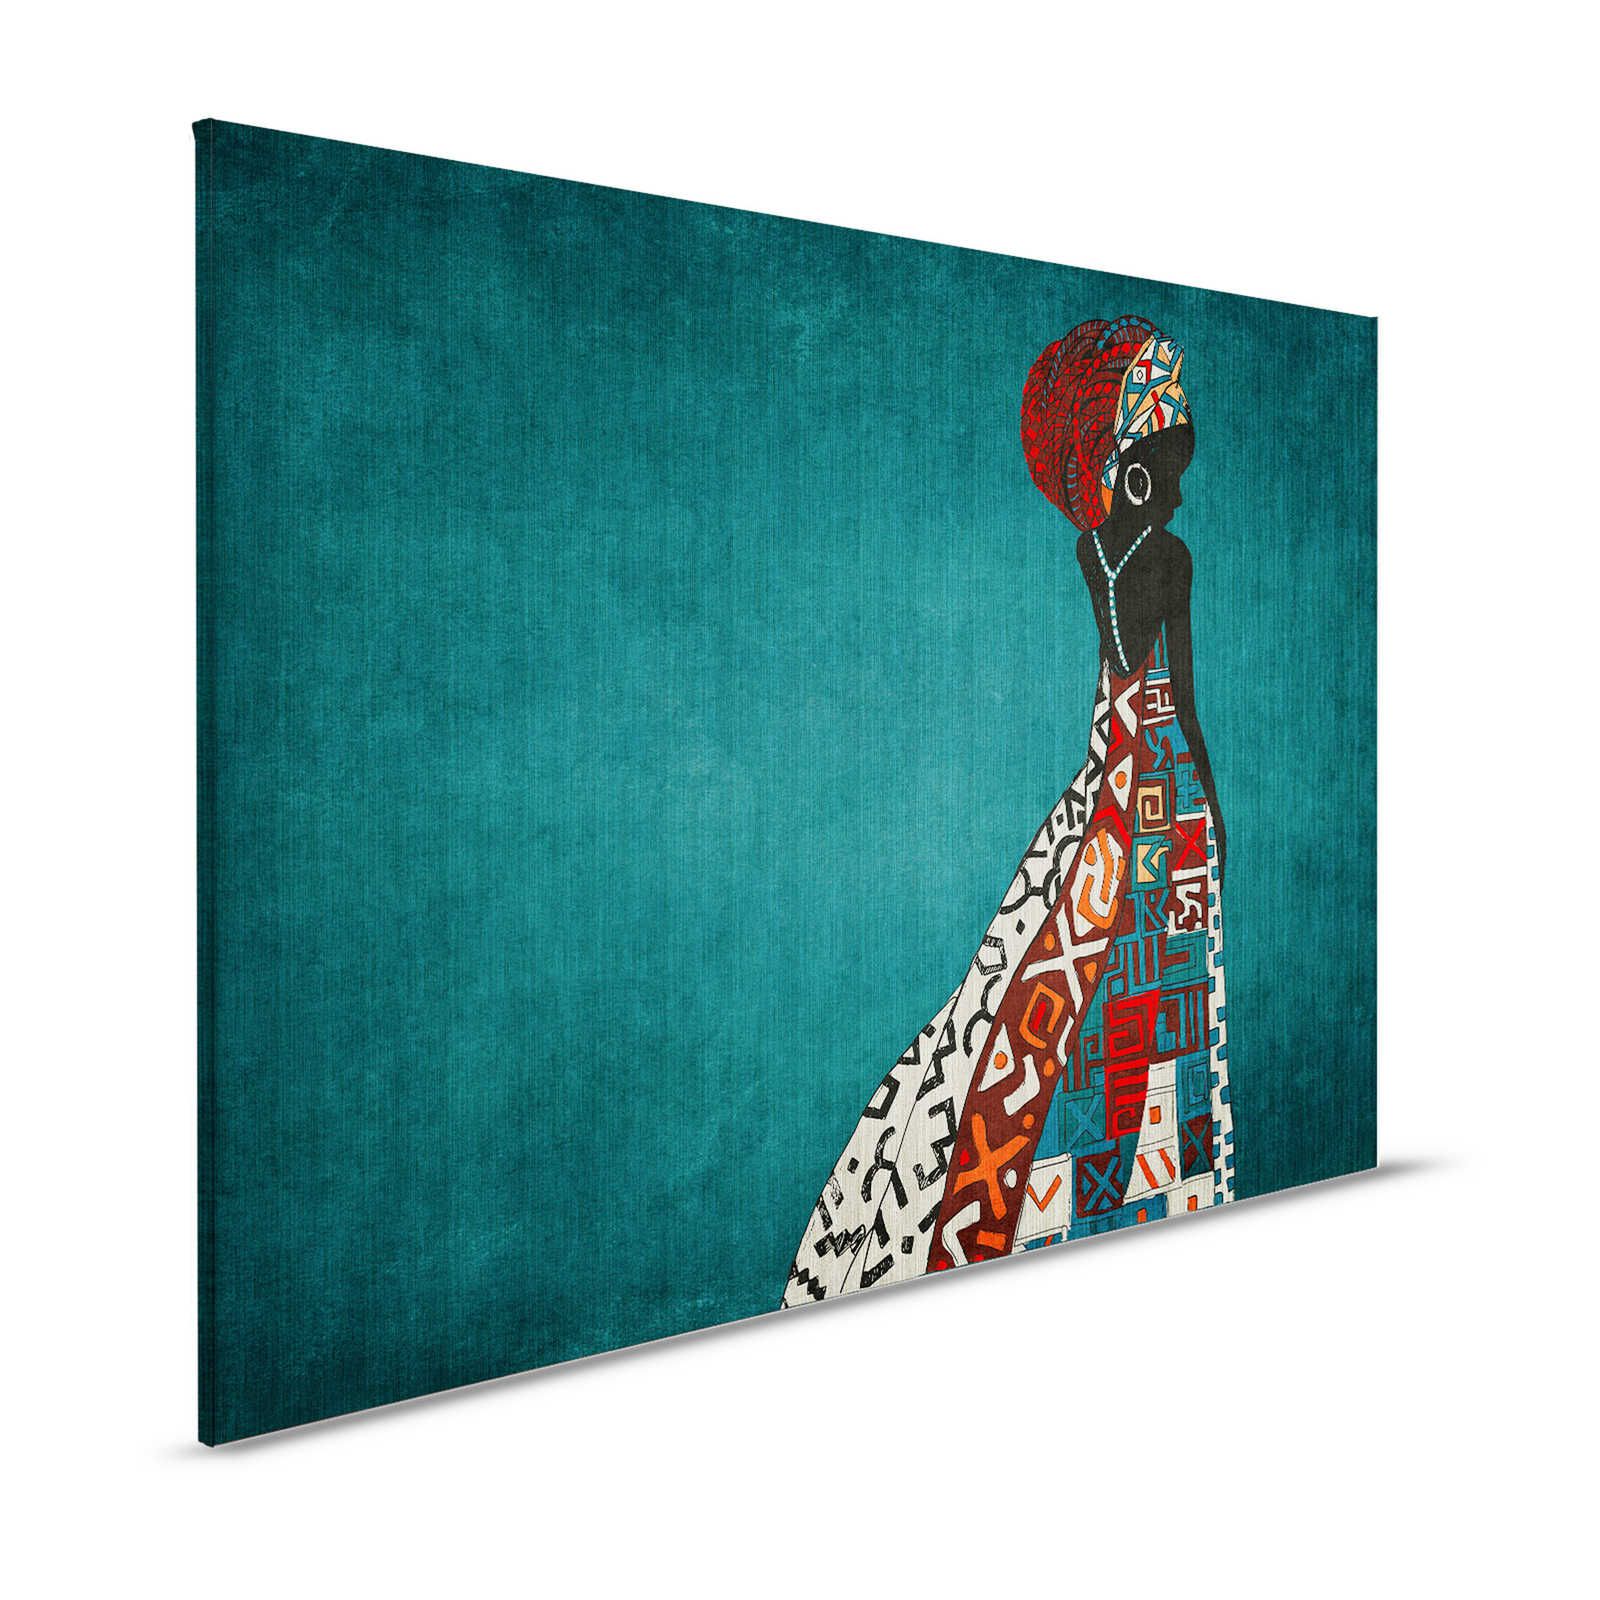 Nairobi 1 - Toile Femme Sillouette African Style - 1,20 m x 0,80 m
